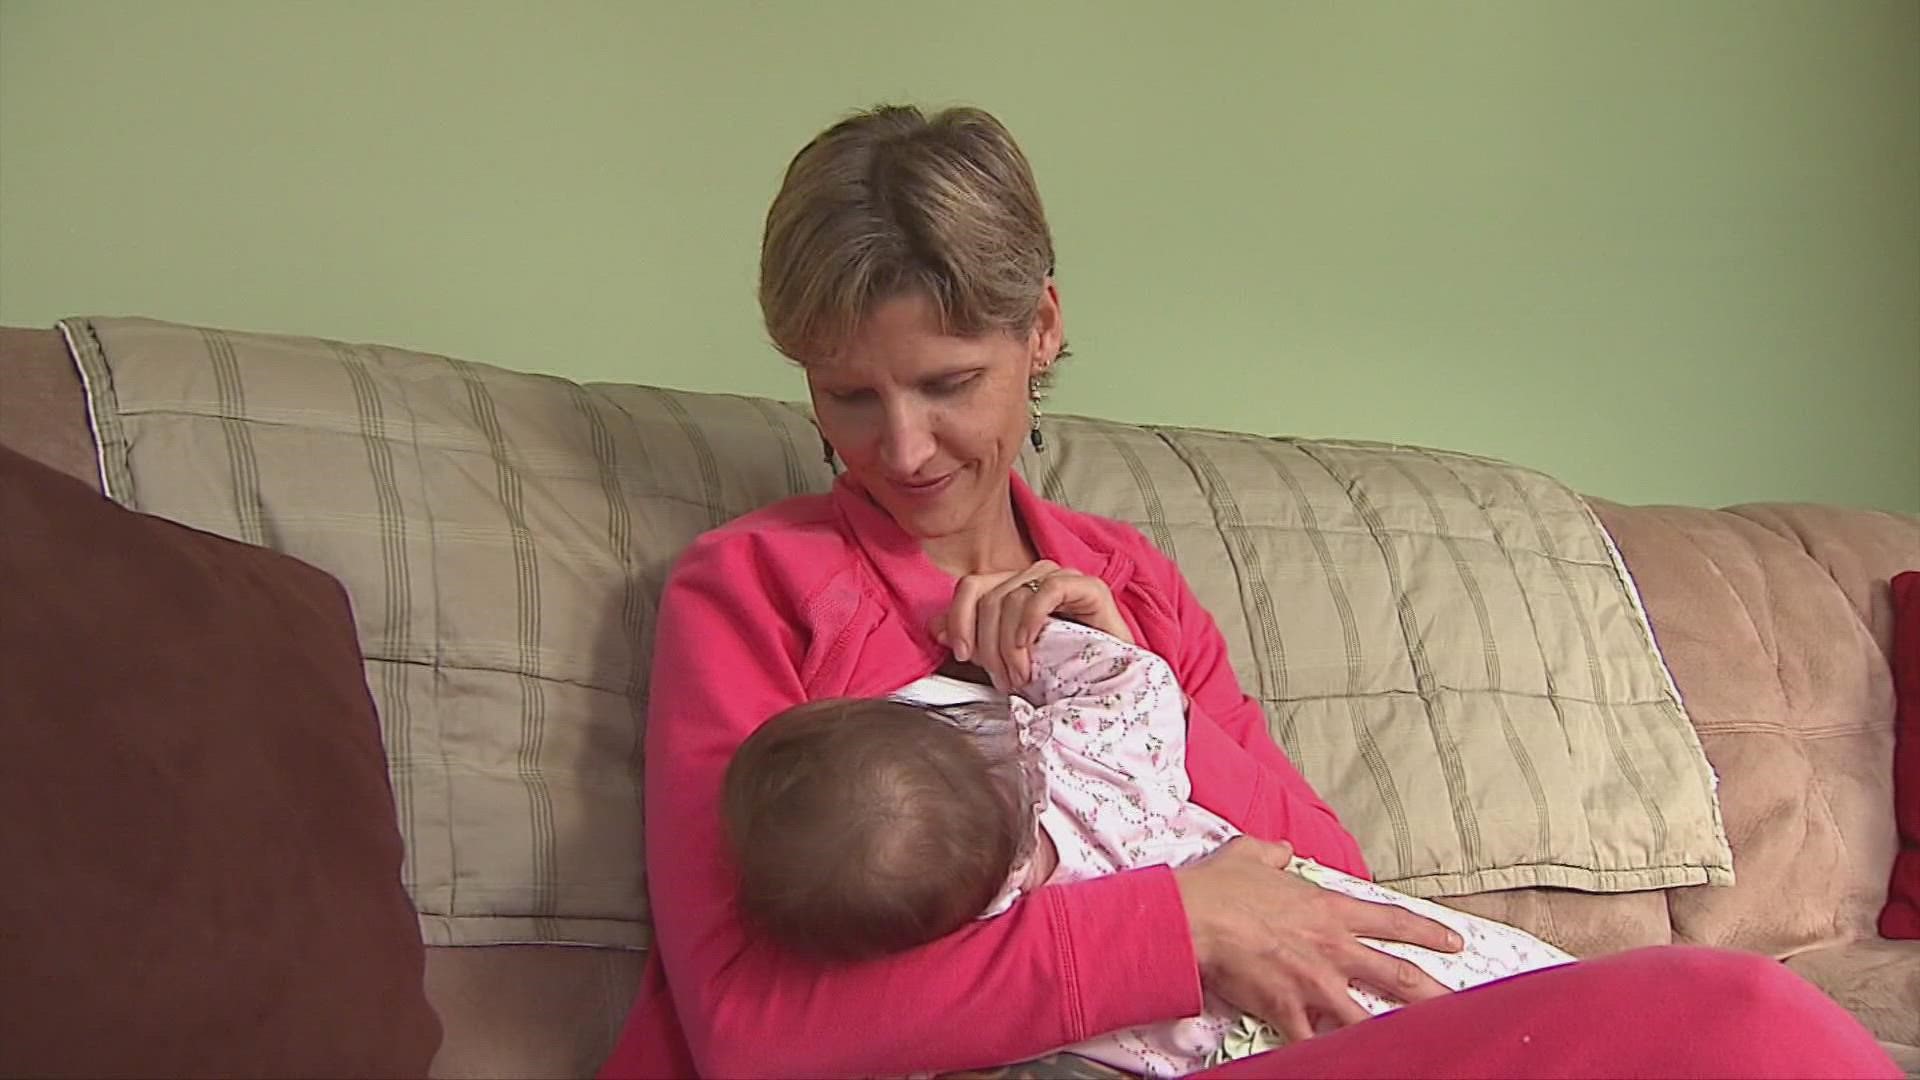 Doctors recently issued new breastfeeding recommendations during World Breastfeeding Week.